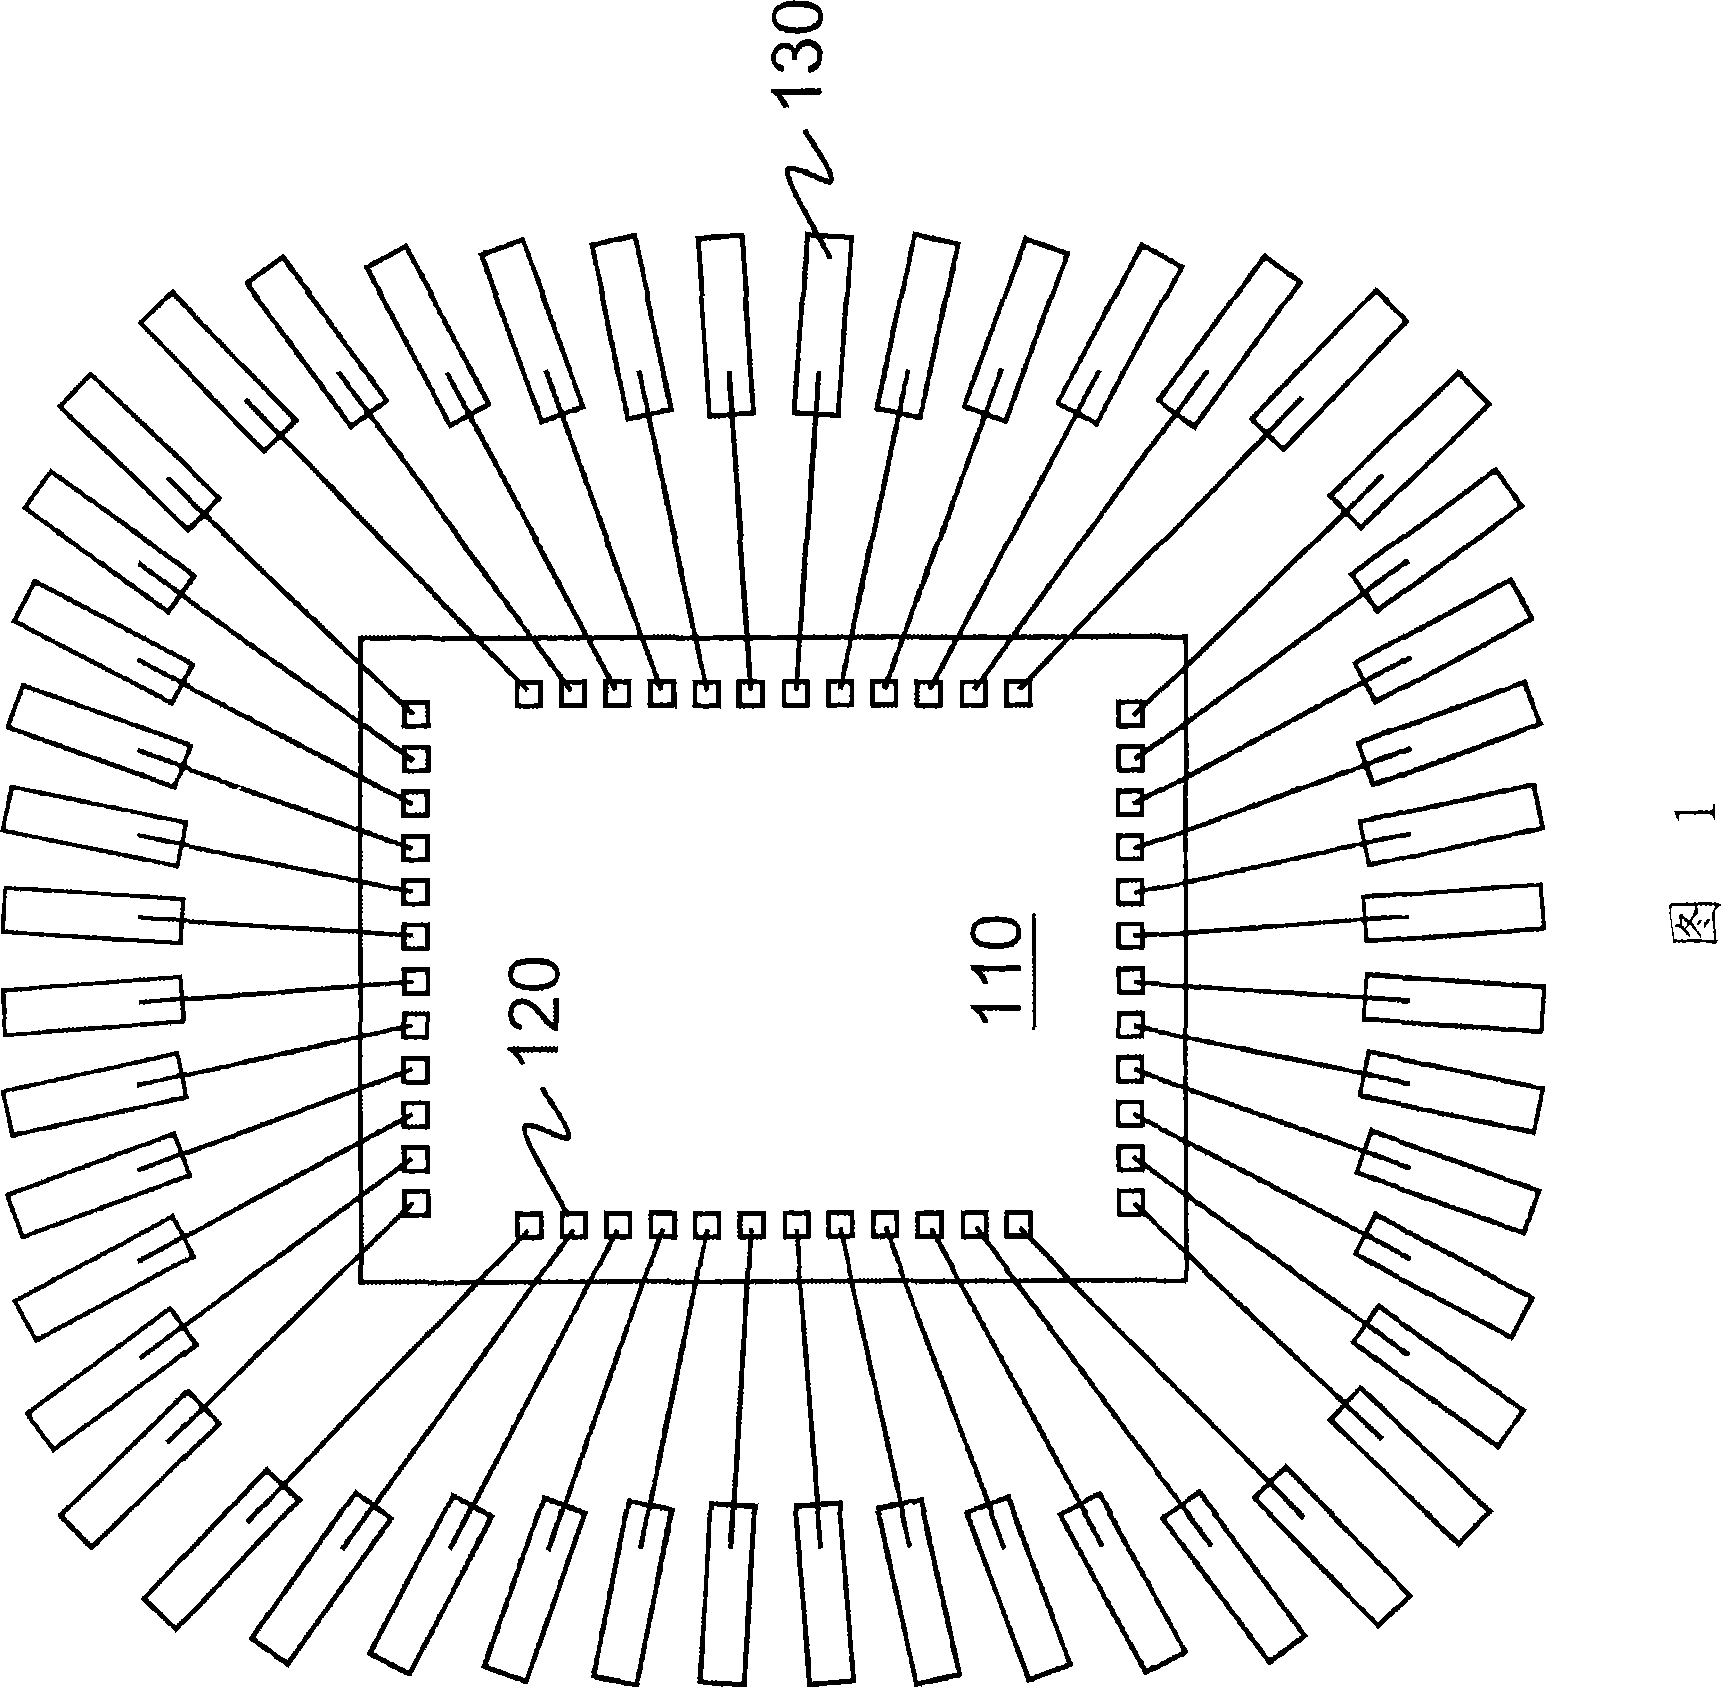 Integrated circuit suitable for various encapsulation modes